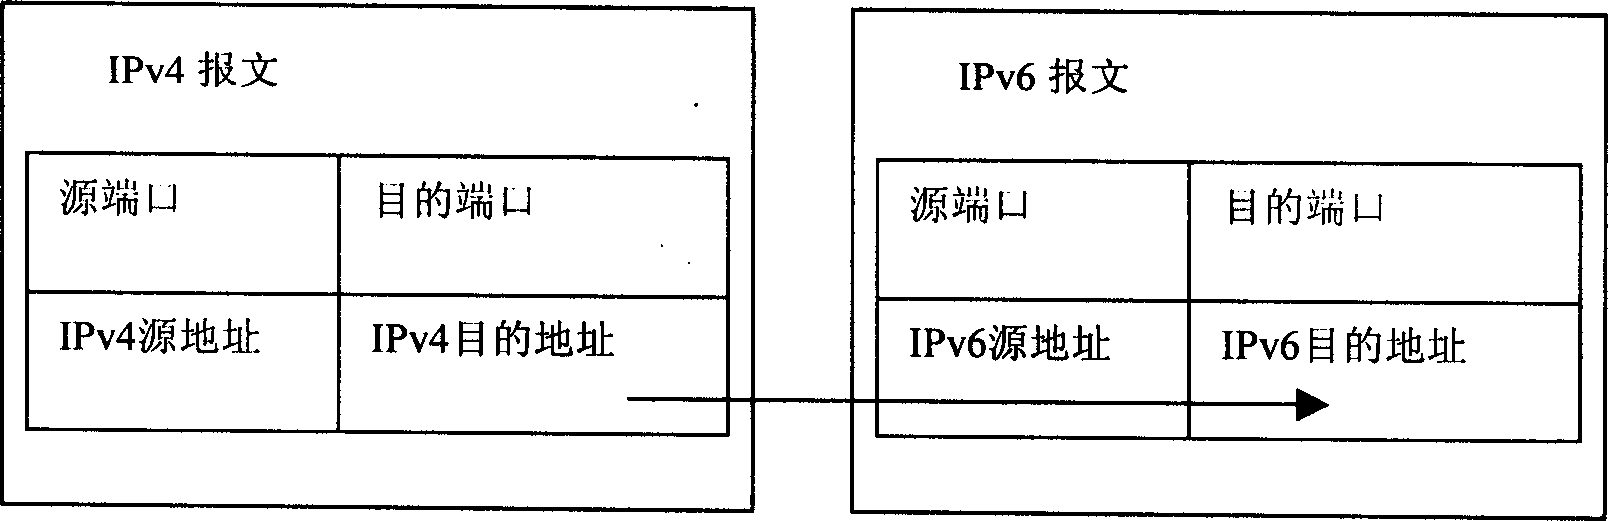 A method for implementing communication between IPv4 network and IPv6 network